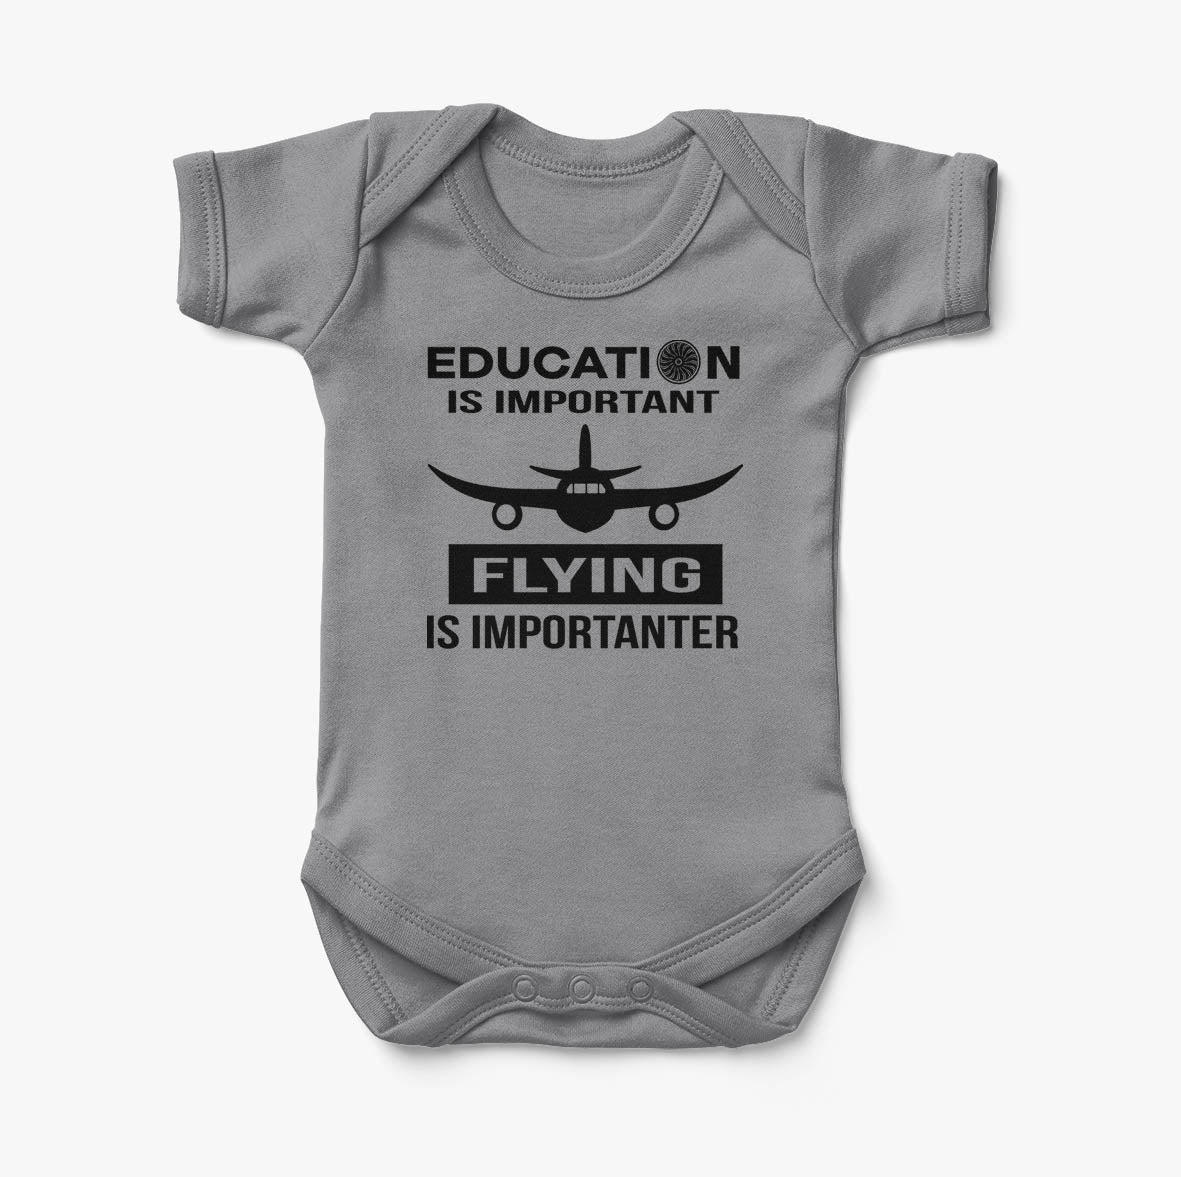 Flying is Importanter Designed Baby Bodysuits